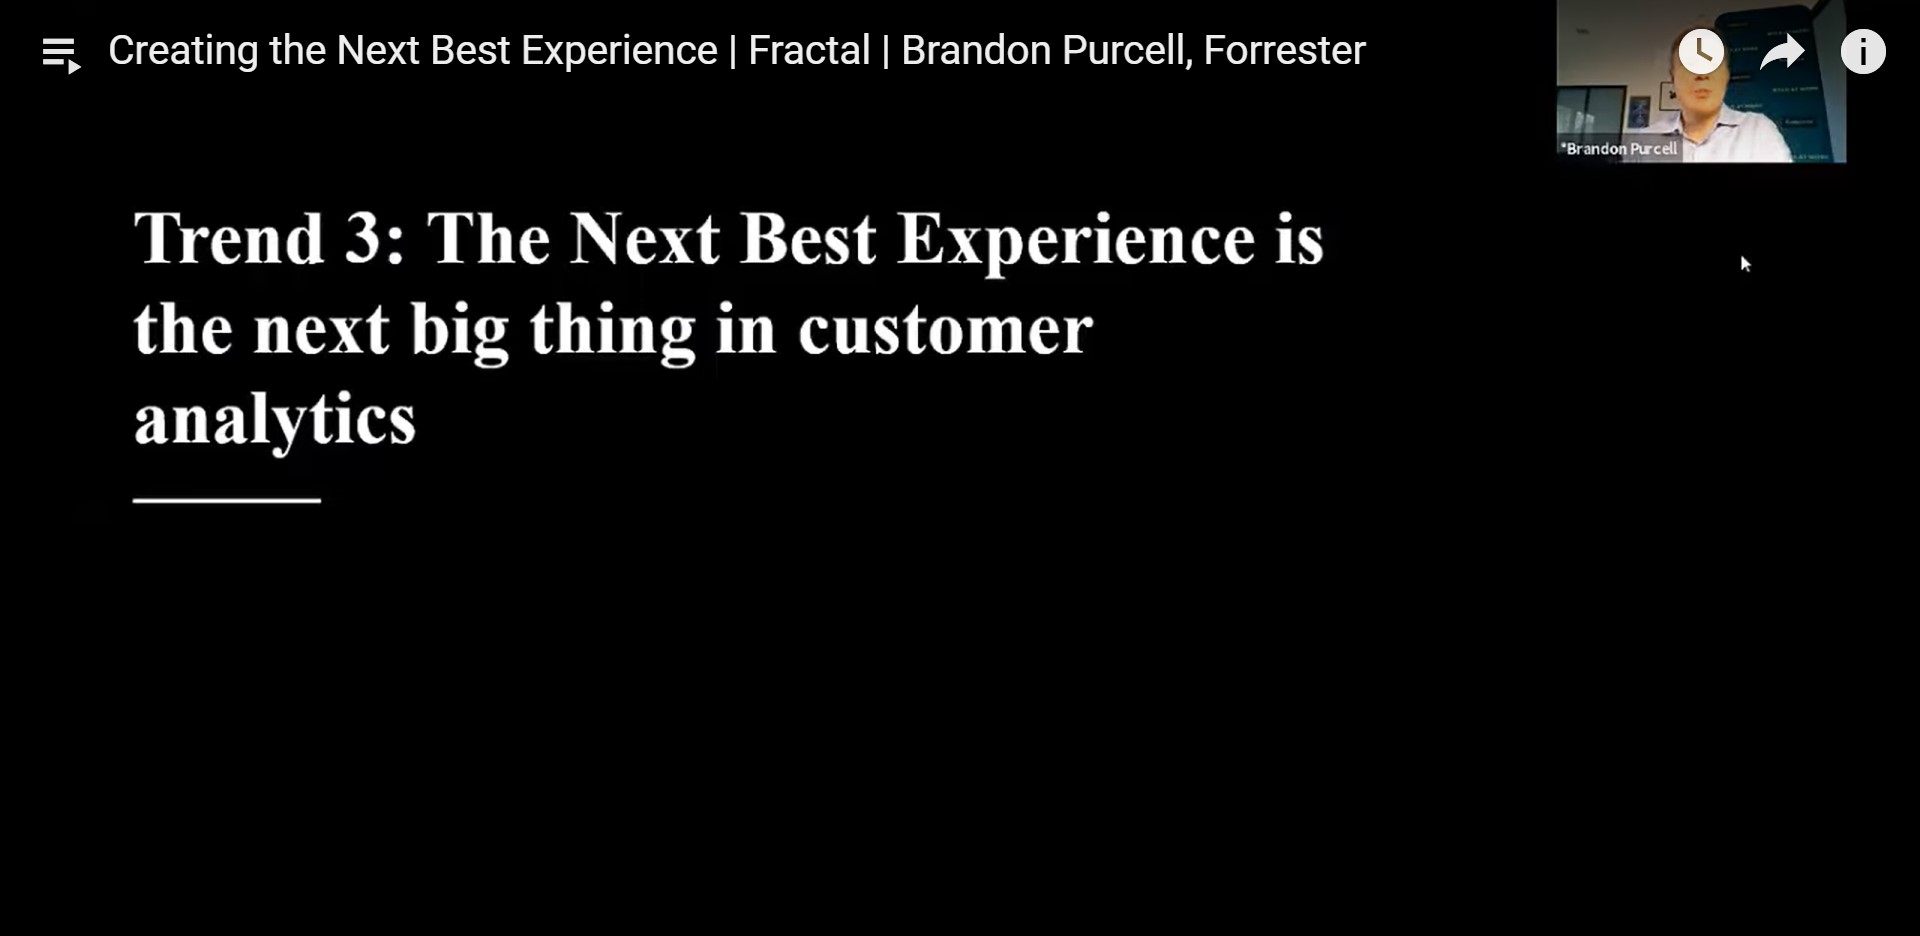 Creating the Next Best Experience